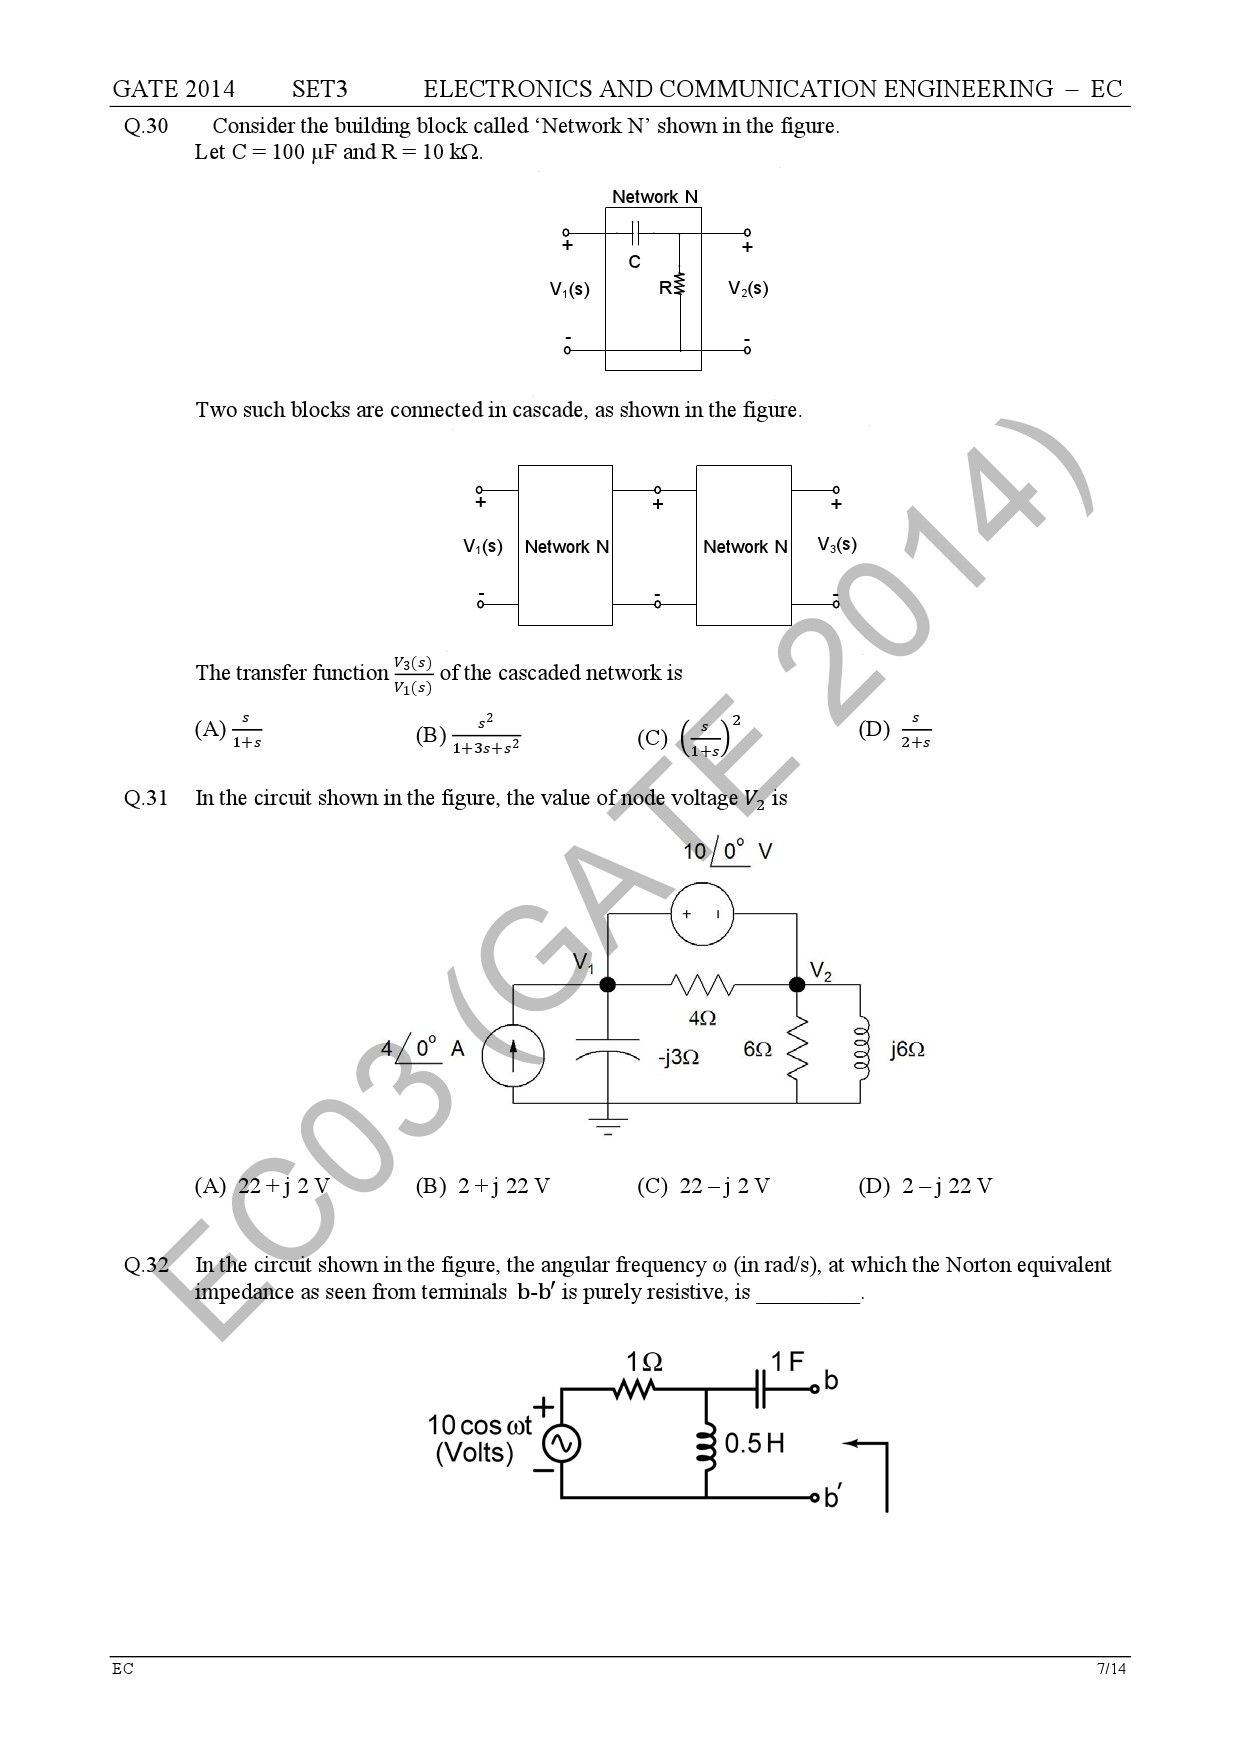 GATE Exam Question Paper 2014 Electronics and Communication Engineering Set 3 14